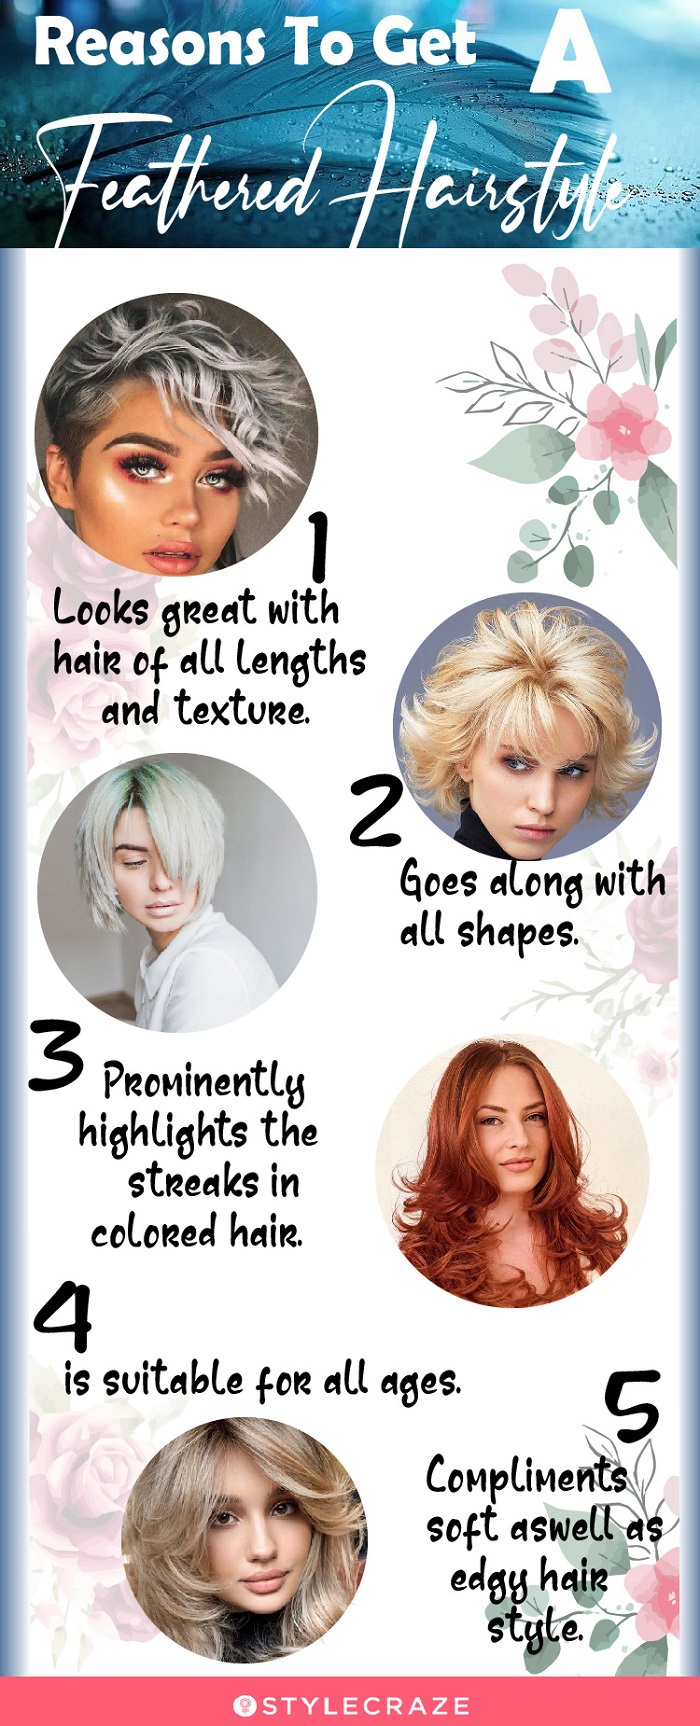 reasons to get a feathered hairstyle [infographic]